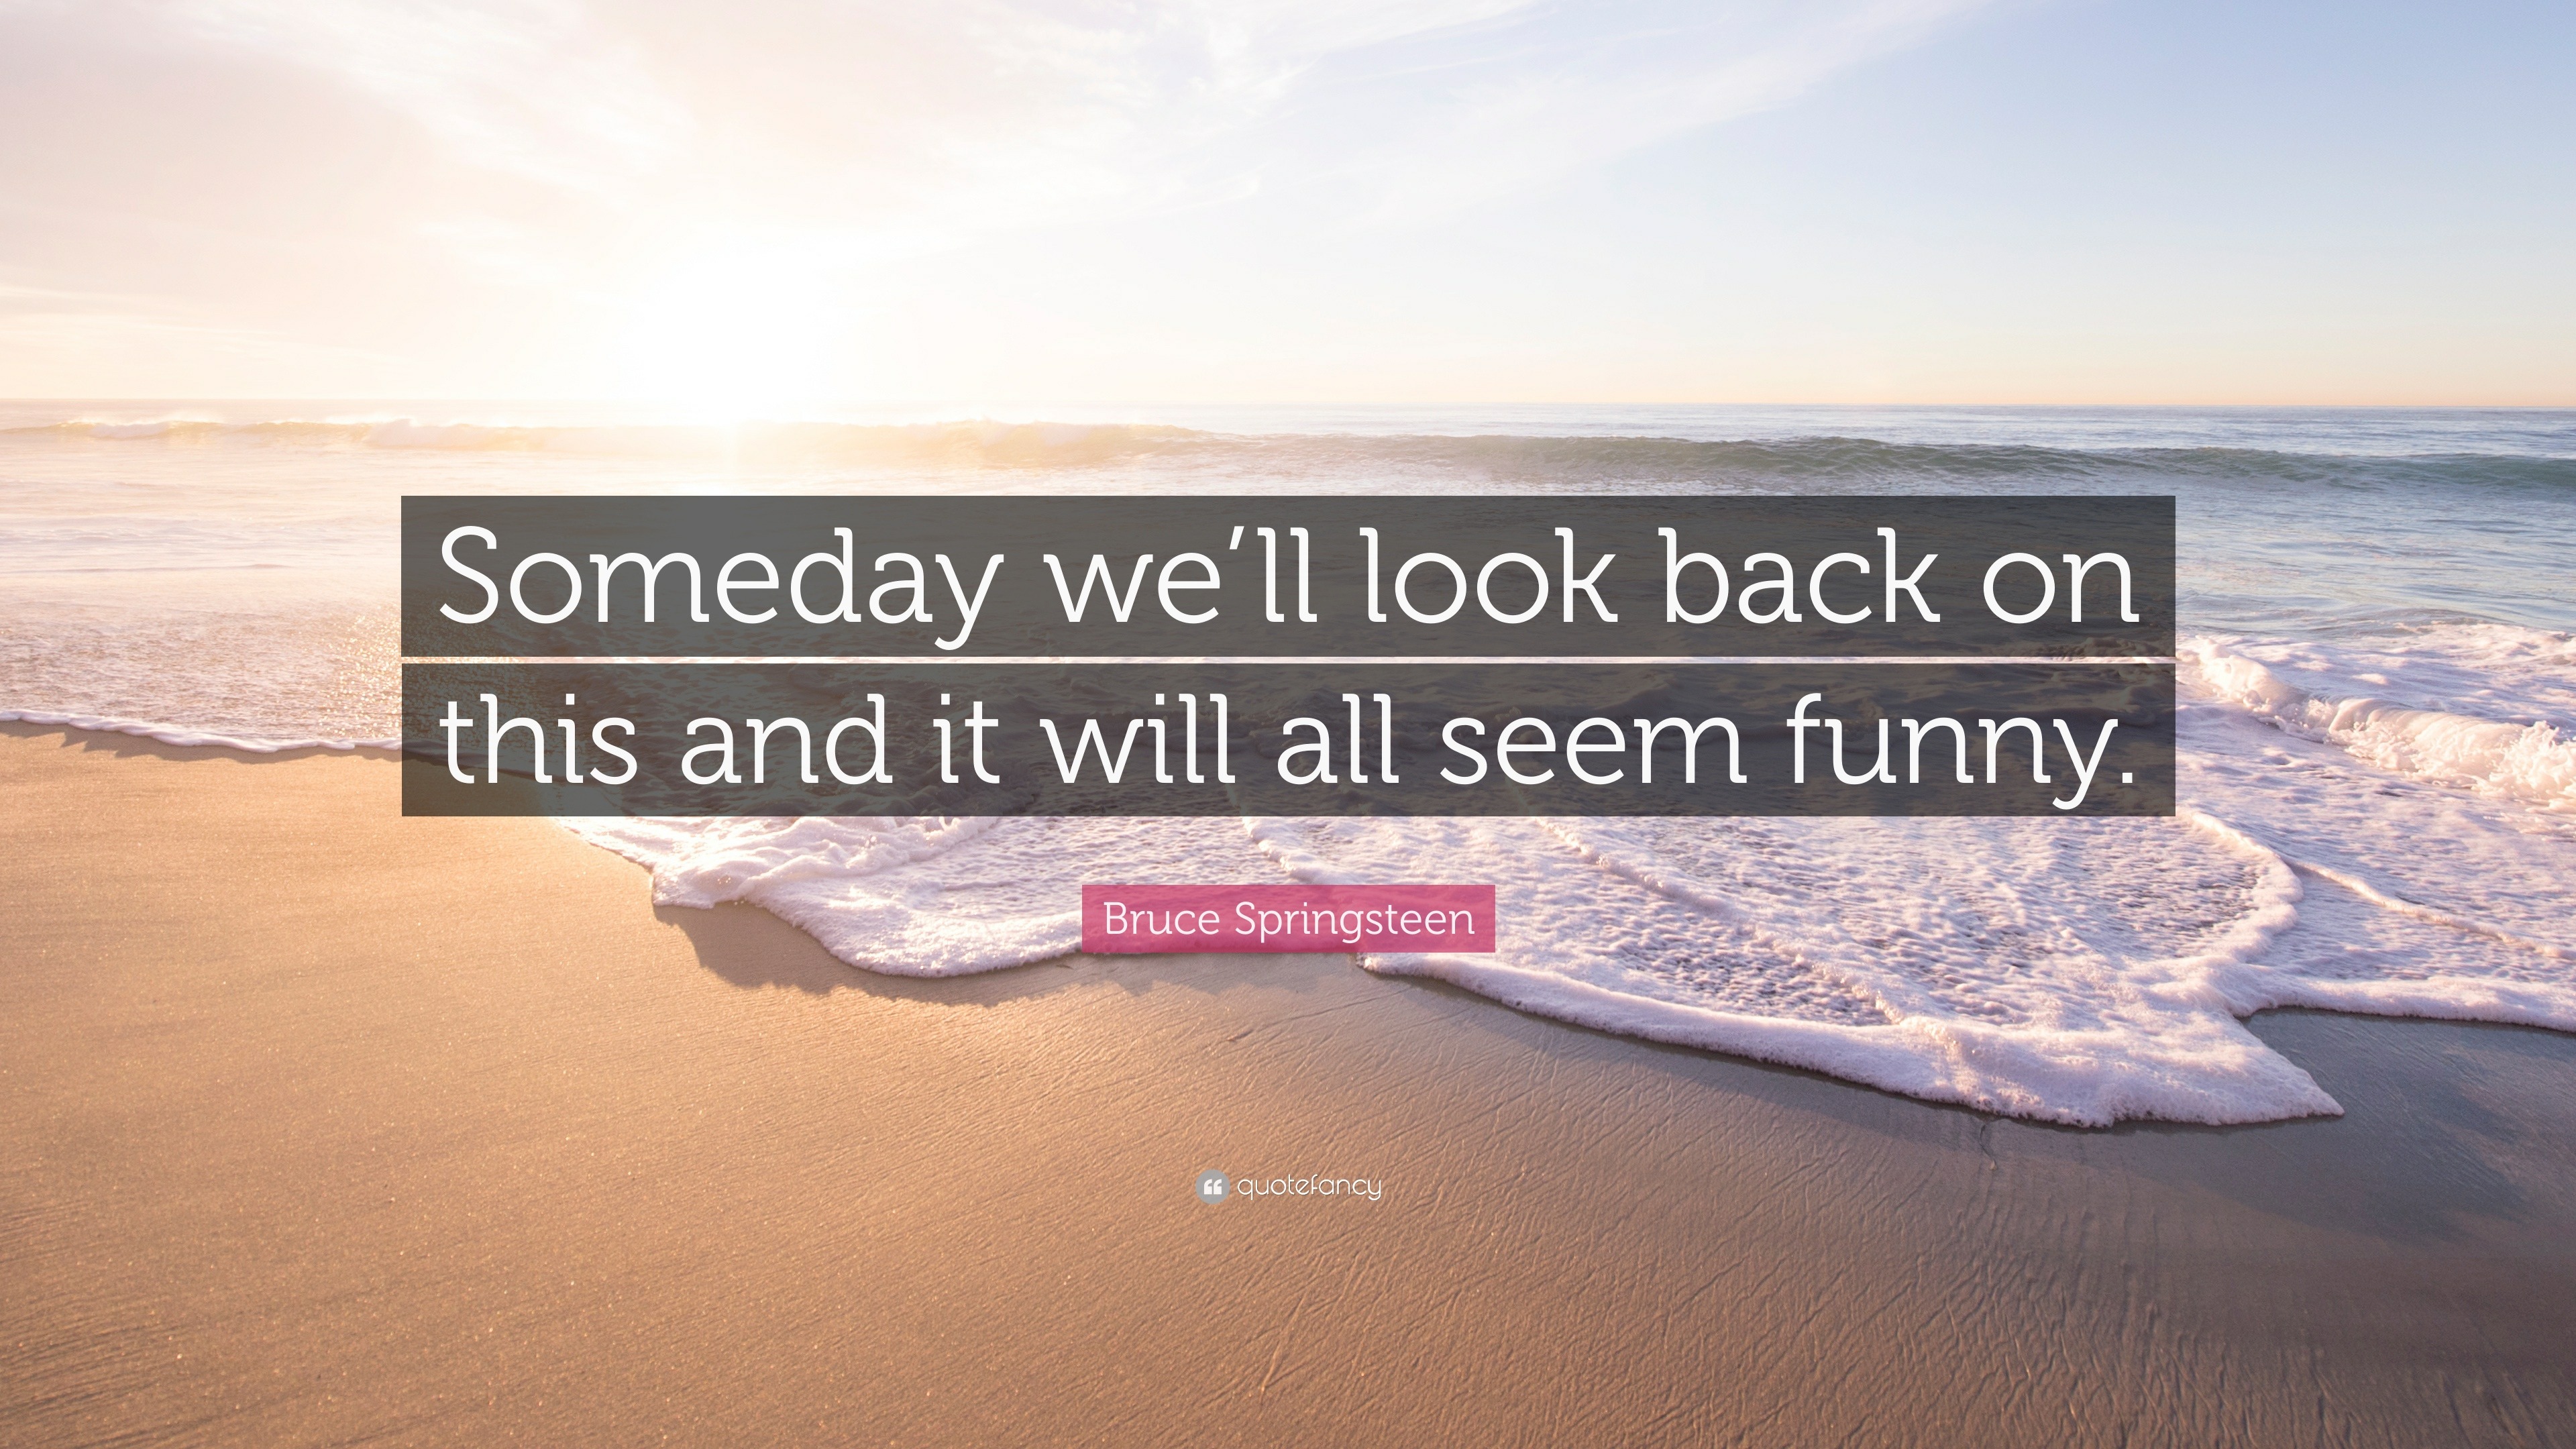 Bruce Springsteen Quote: “Someday we'll look back on this and it will all  seem funny.”